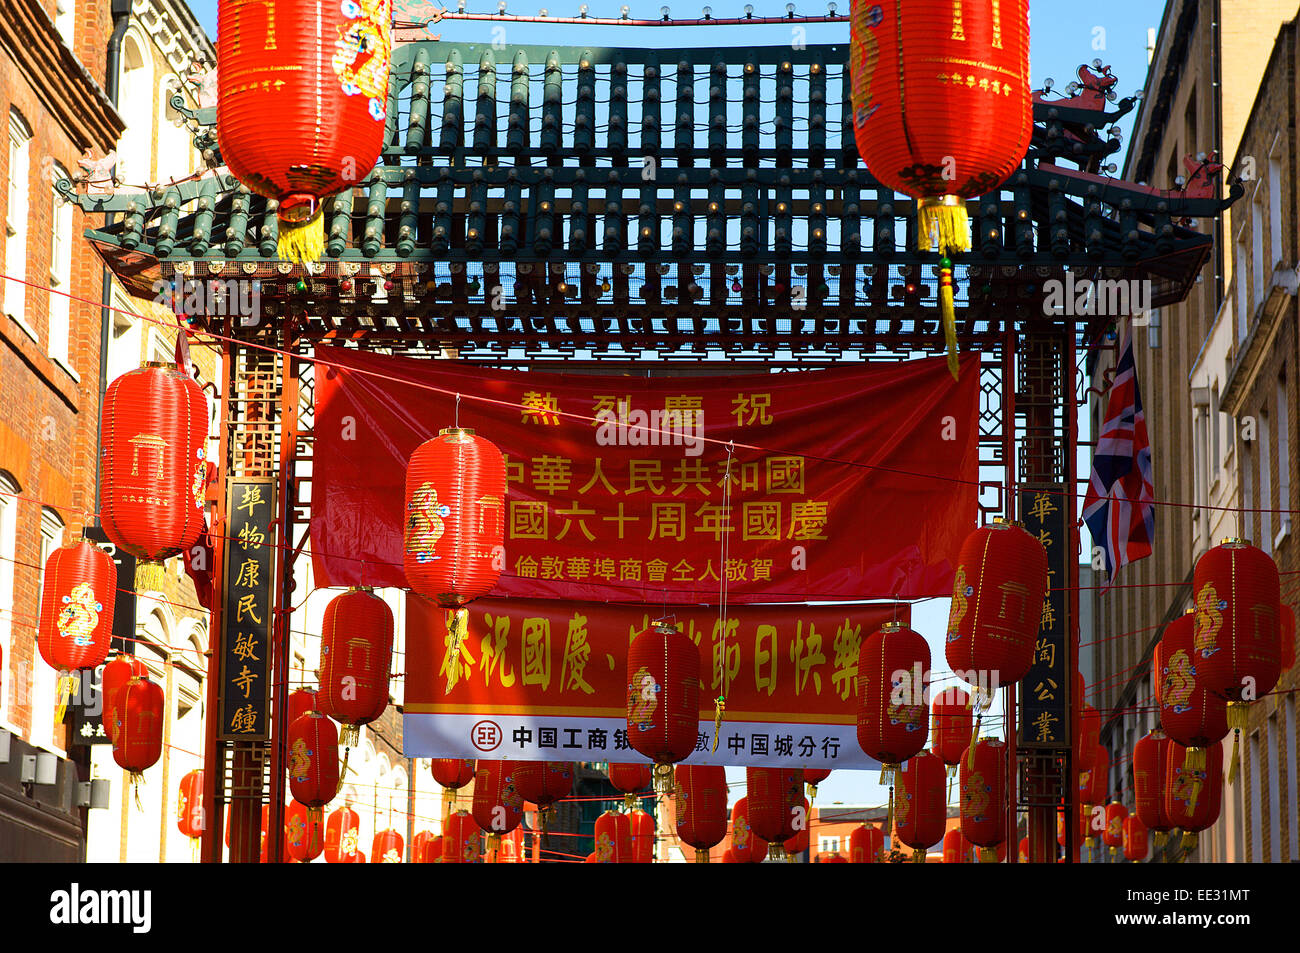 During Chinese New Year, the gates at the ends of Gerrard Street are decorated with red and gold banners, lanterns and bunting. Stock Photo